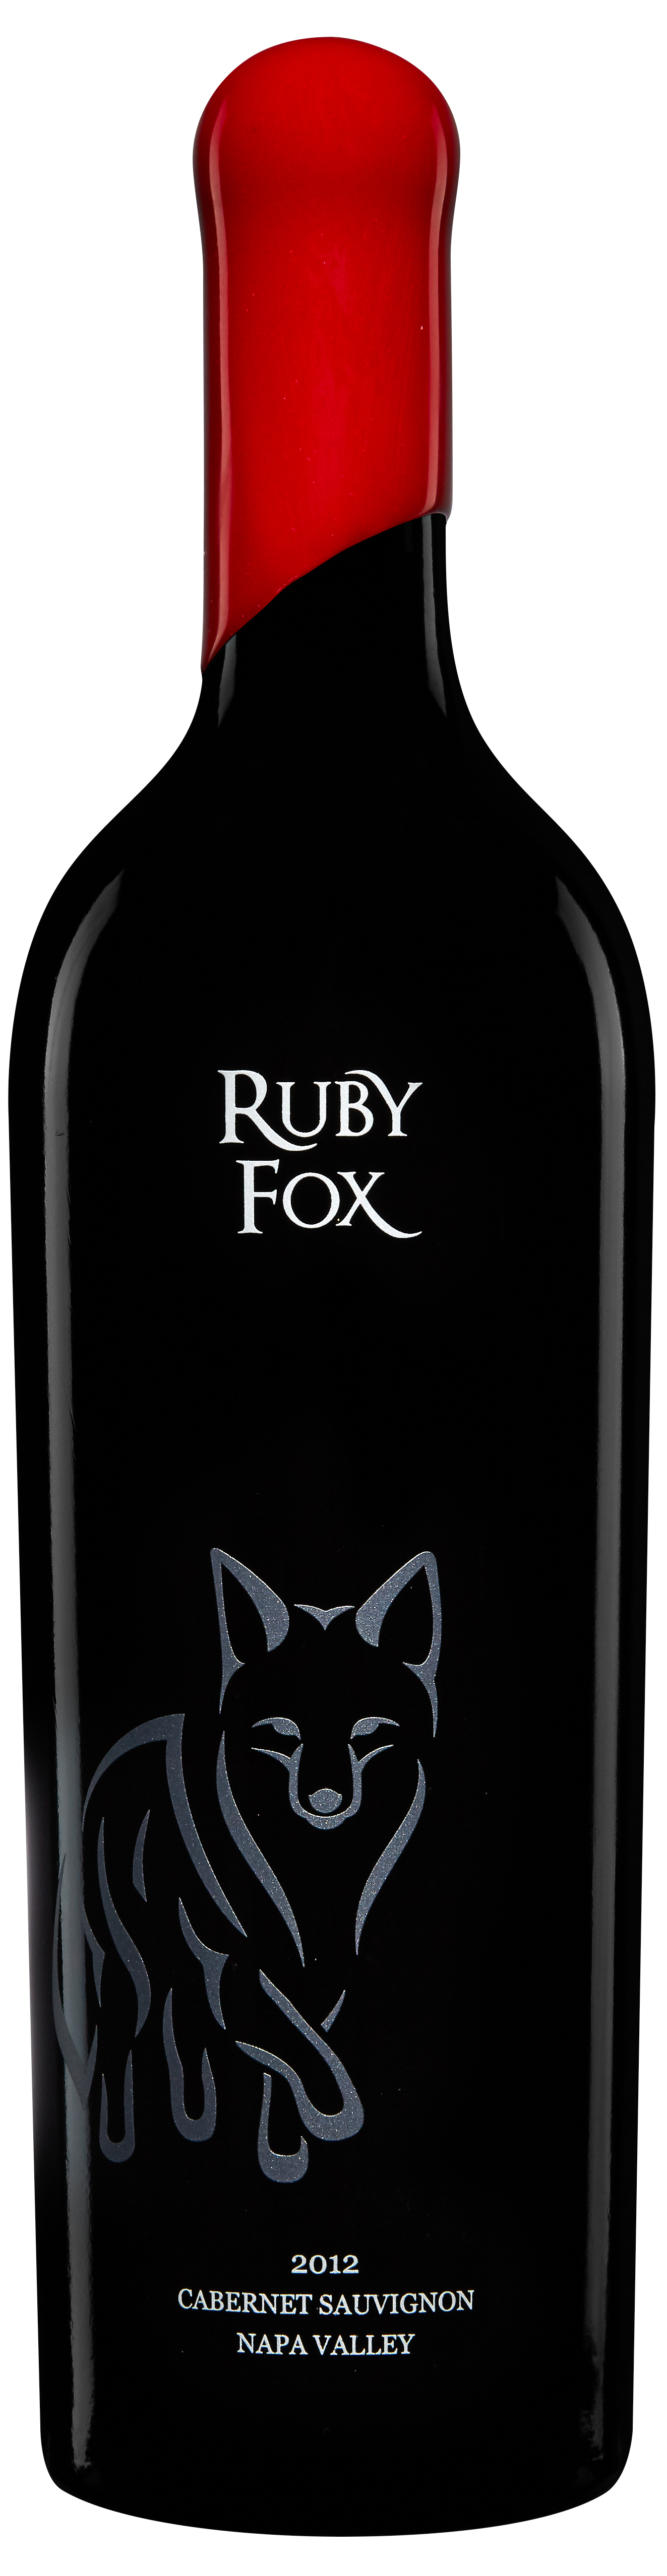 Product Image for 2018 Ruby Fox